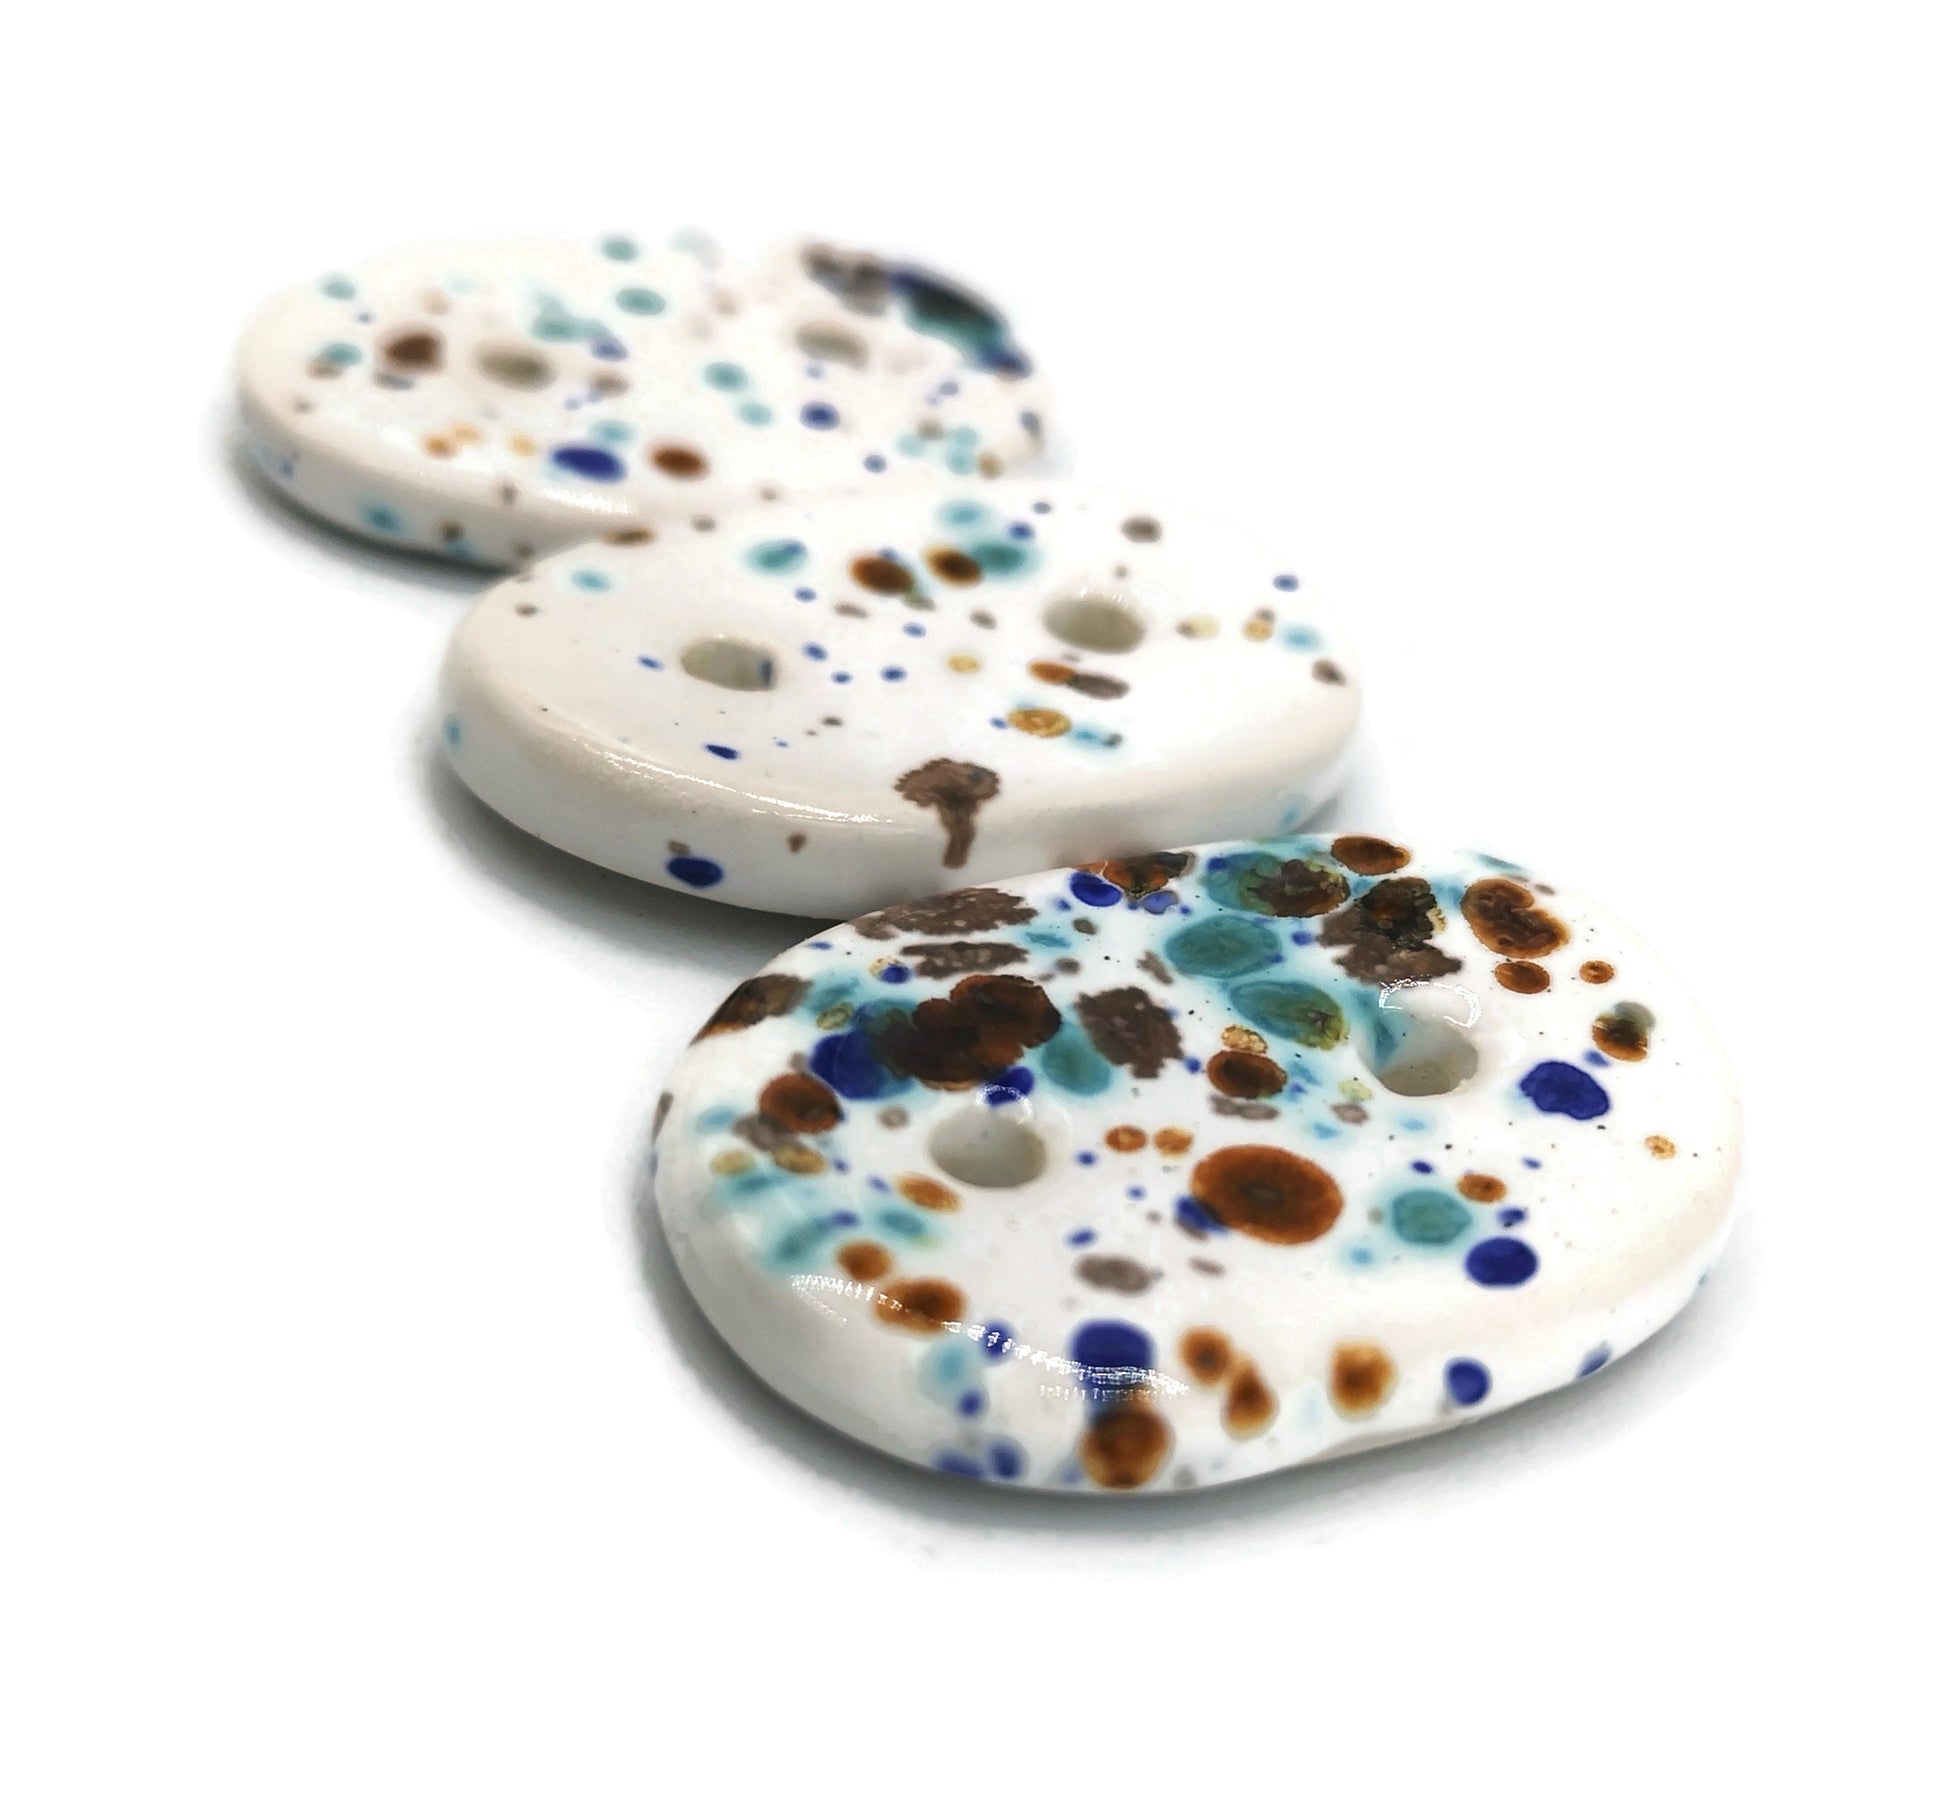 3Pc 35mm Decorative Oval Sewing Buttons, Handmade Ceramic Sewing Supplies And Notions, Extra Large Buttons, Cute Confetti Coat Buttons - Ceramica Ana Rafael